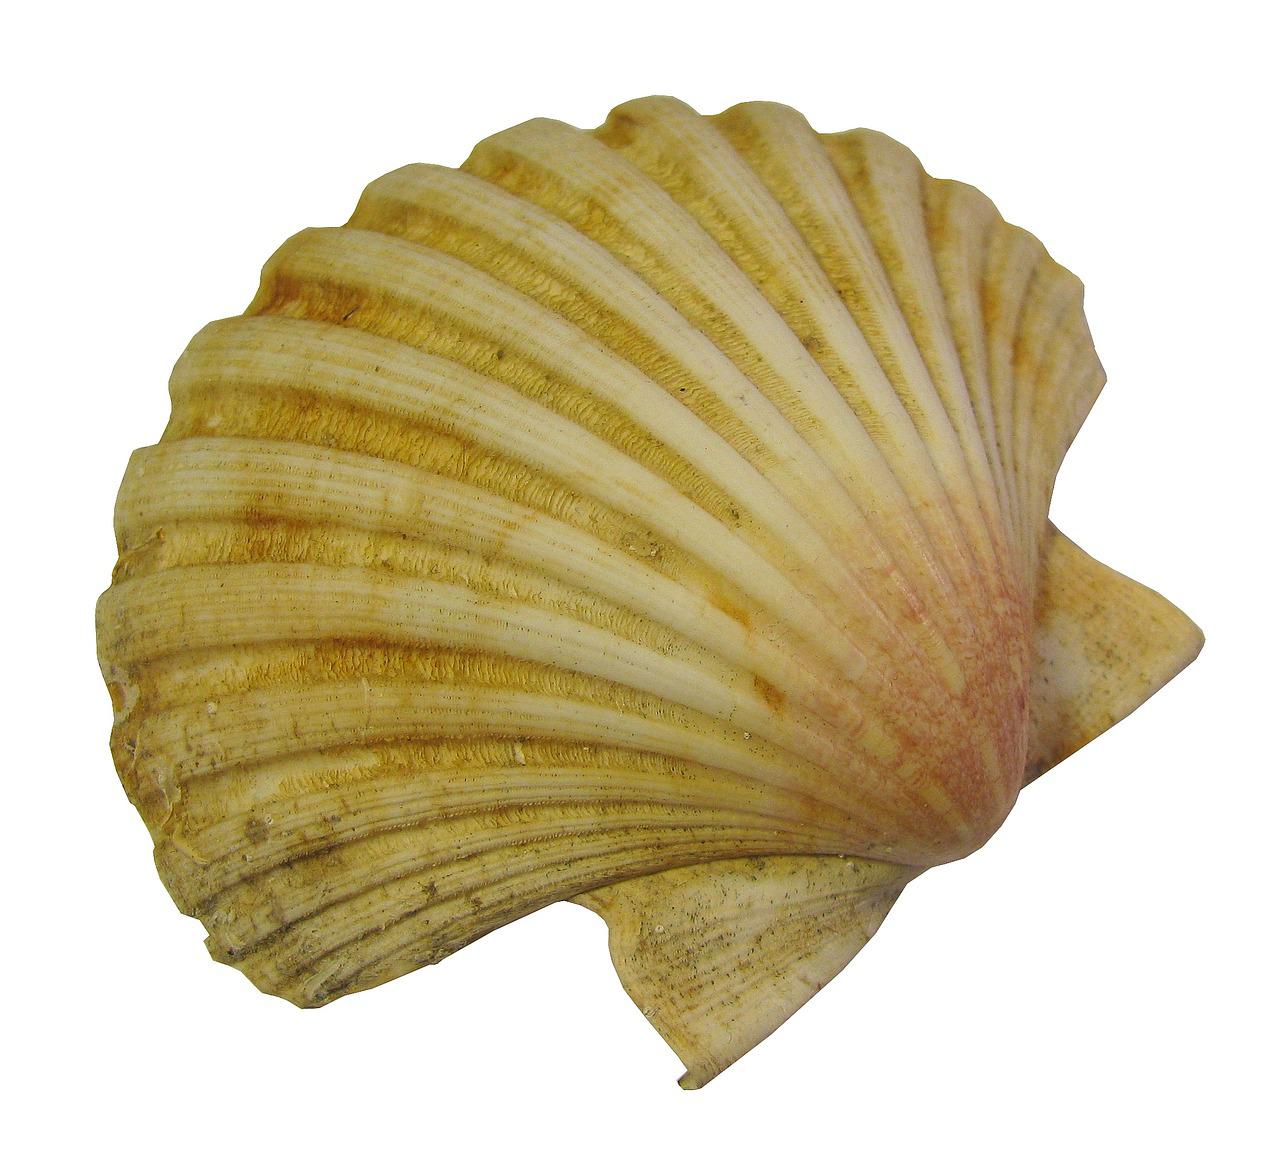 The Scallop Shell was the emblem worn by pilgrims to Compostela